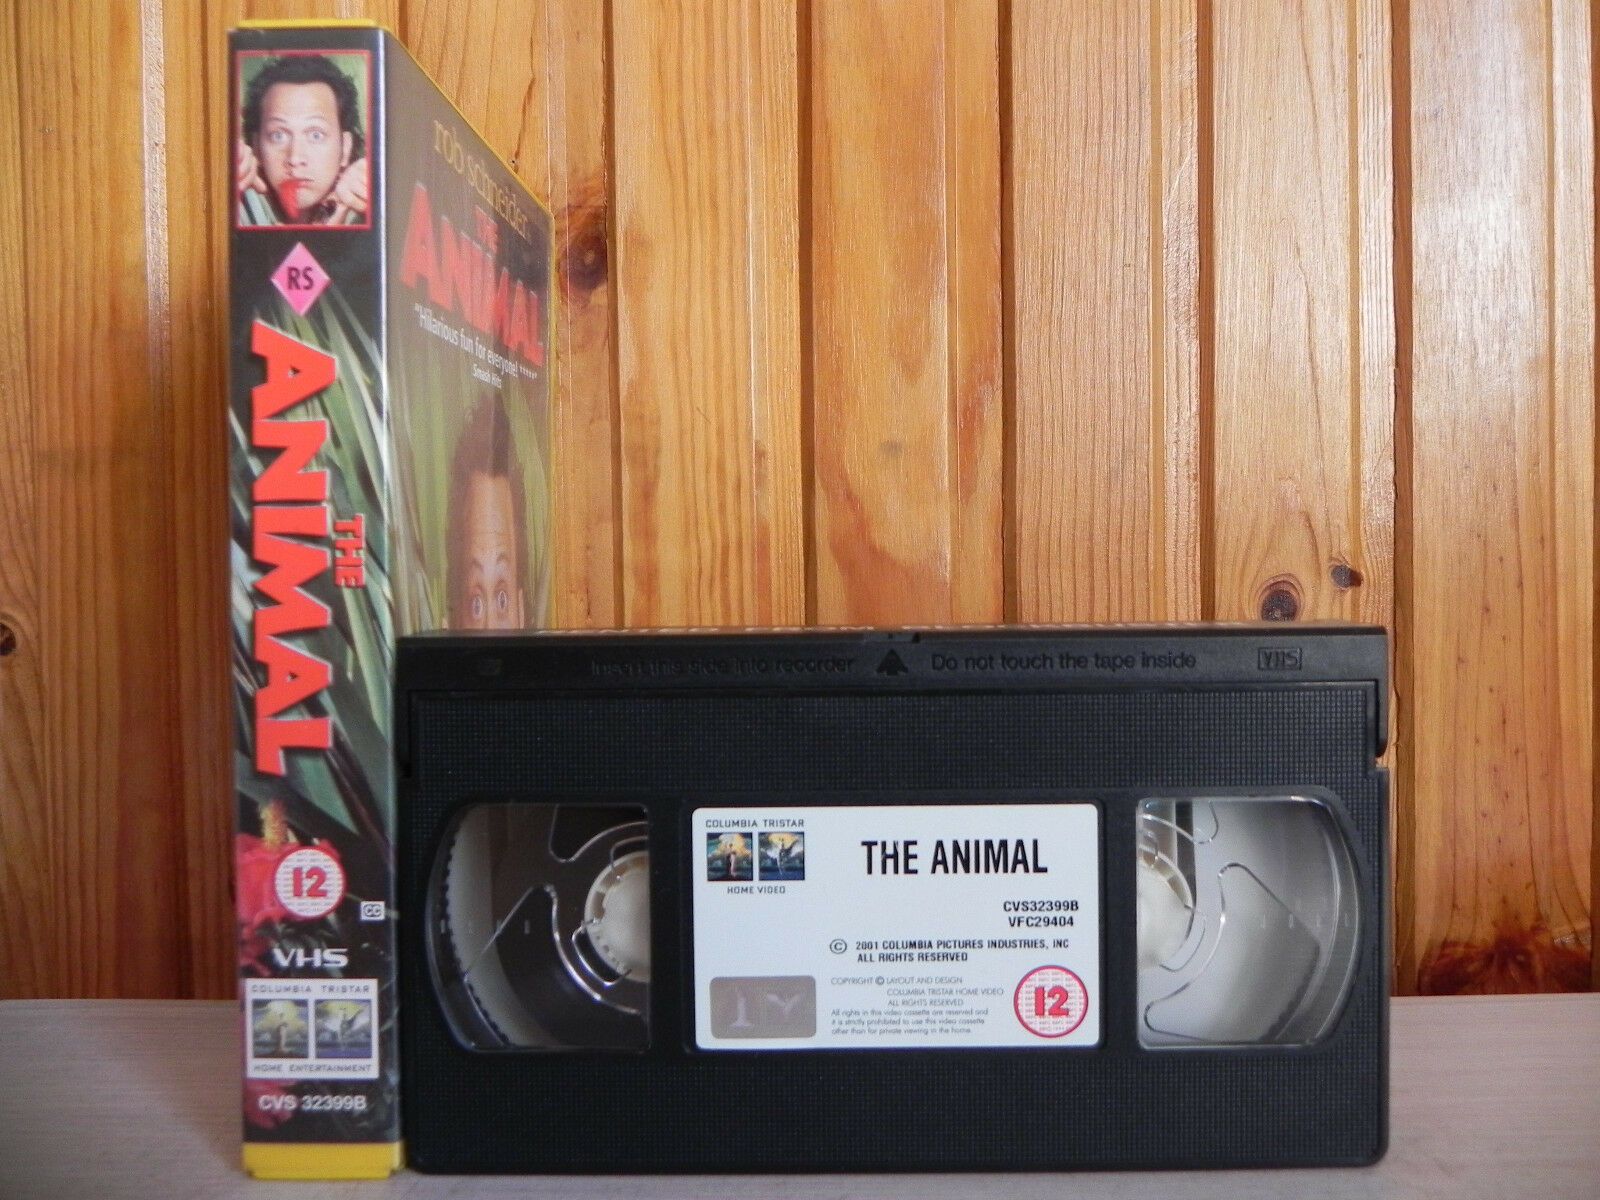 The Animal - Columbia - Comedy - Rob Schneider - Collen Haskell - Pal VHS-